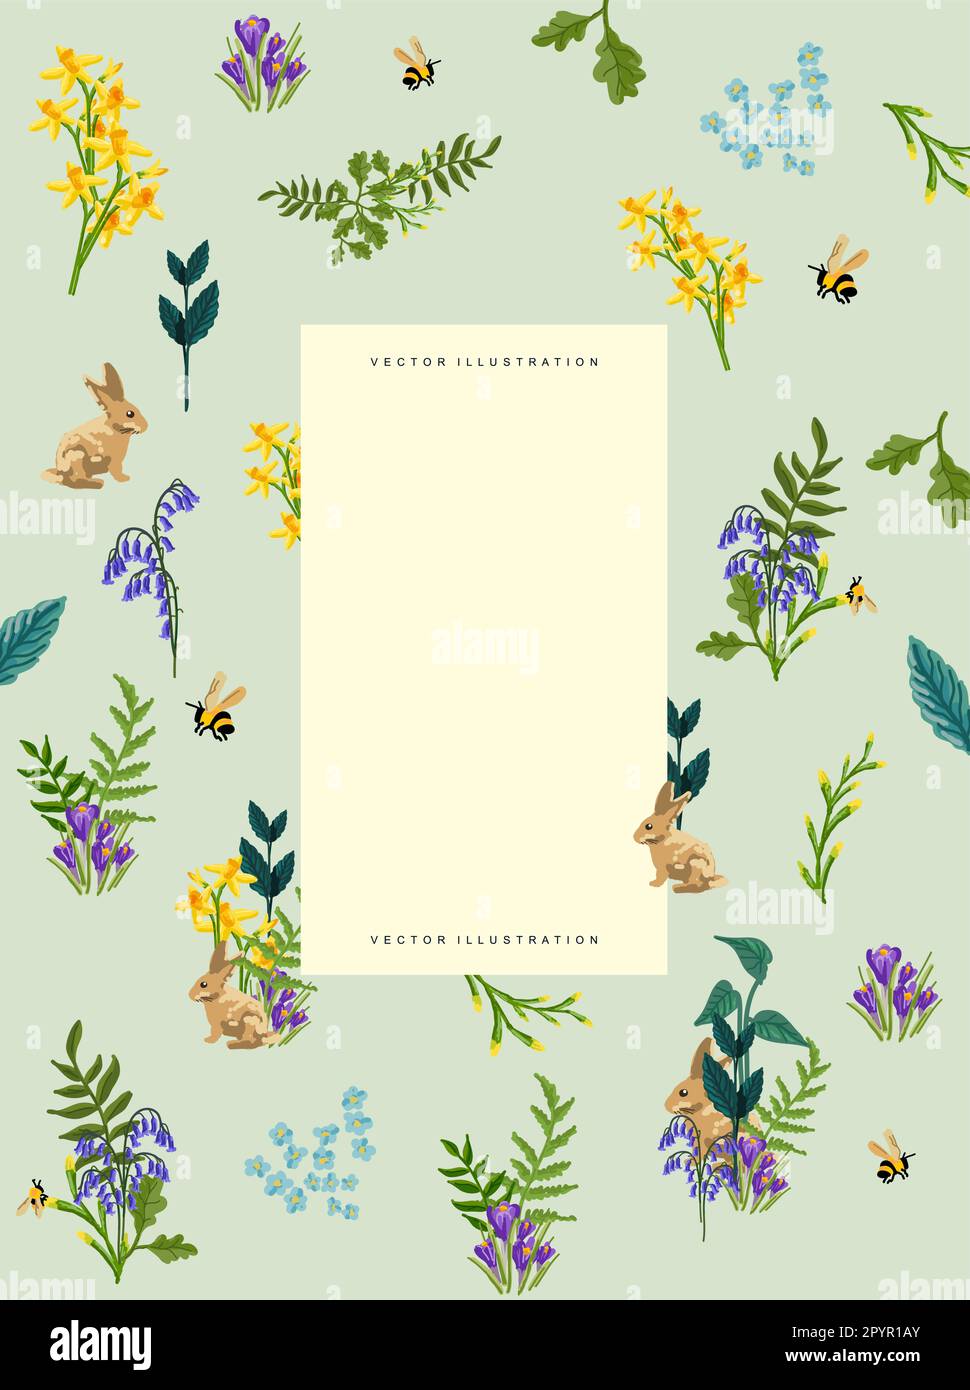 Floral Spring background layout with bluebells, daffodils and wild plants. Vector decorative layout composition Stock Vector